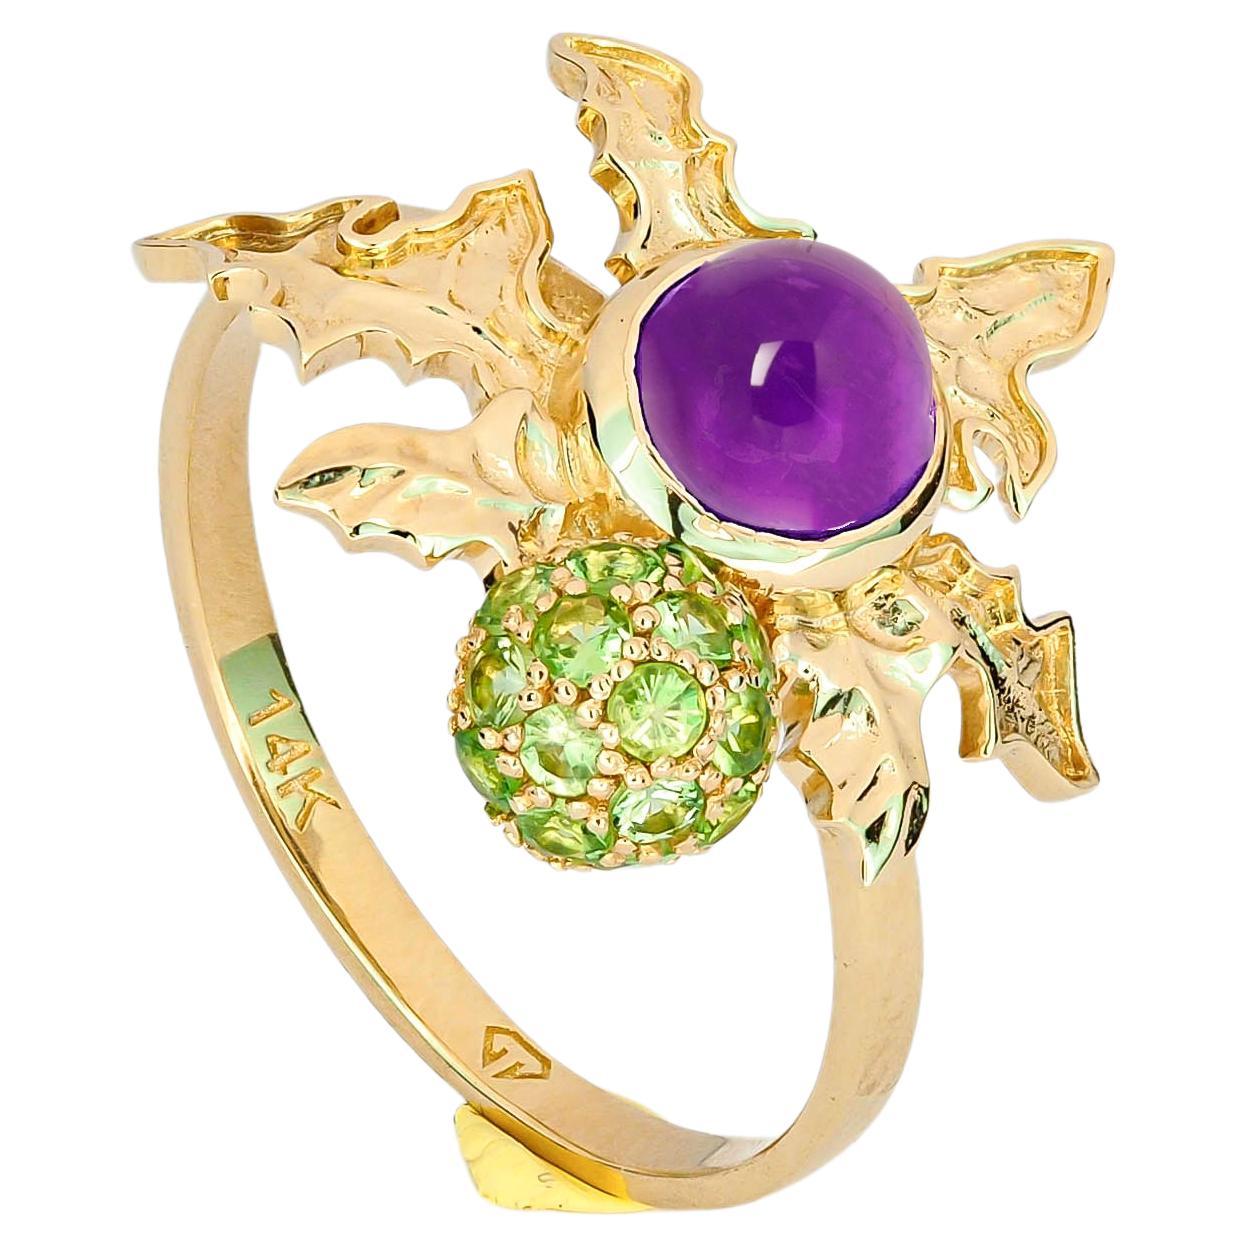 14 K Gold Scottish Thistle Ring with Amethyst and Peridots!